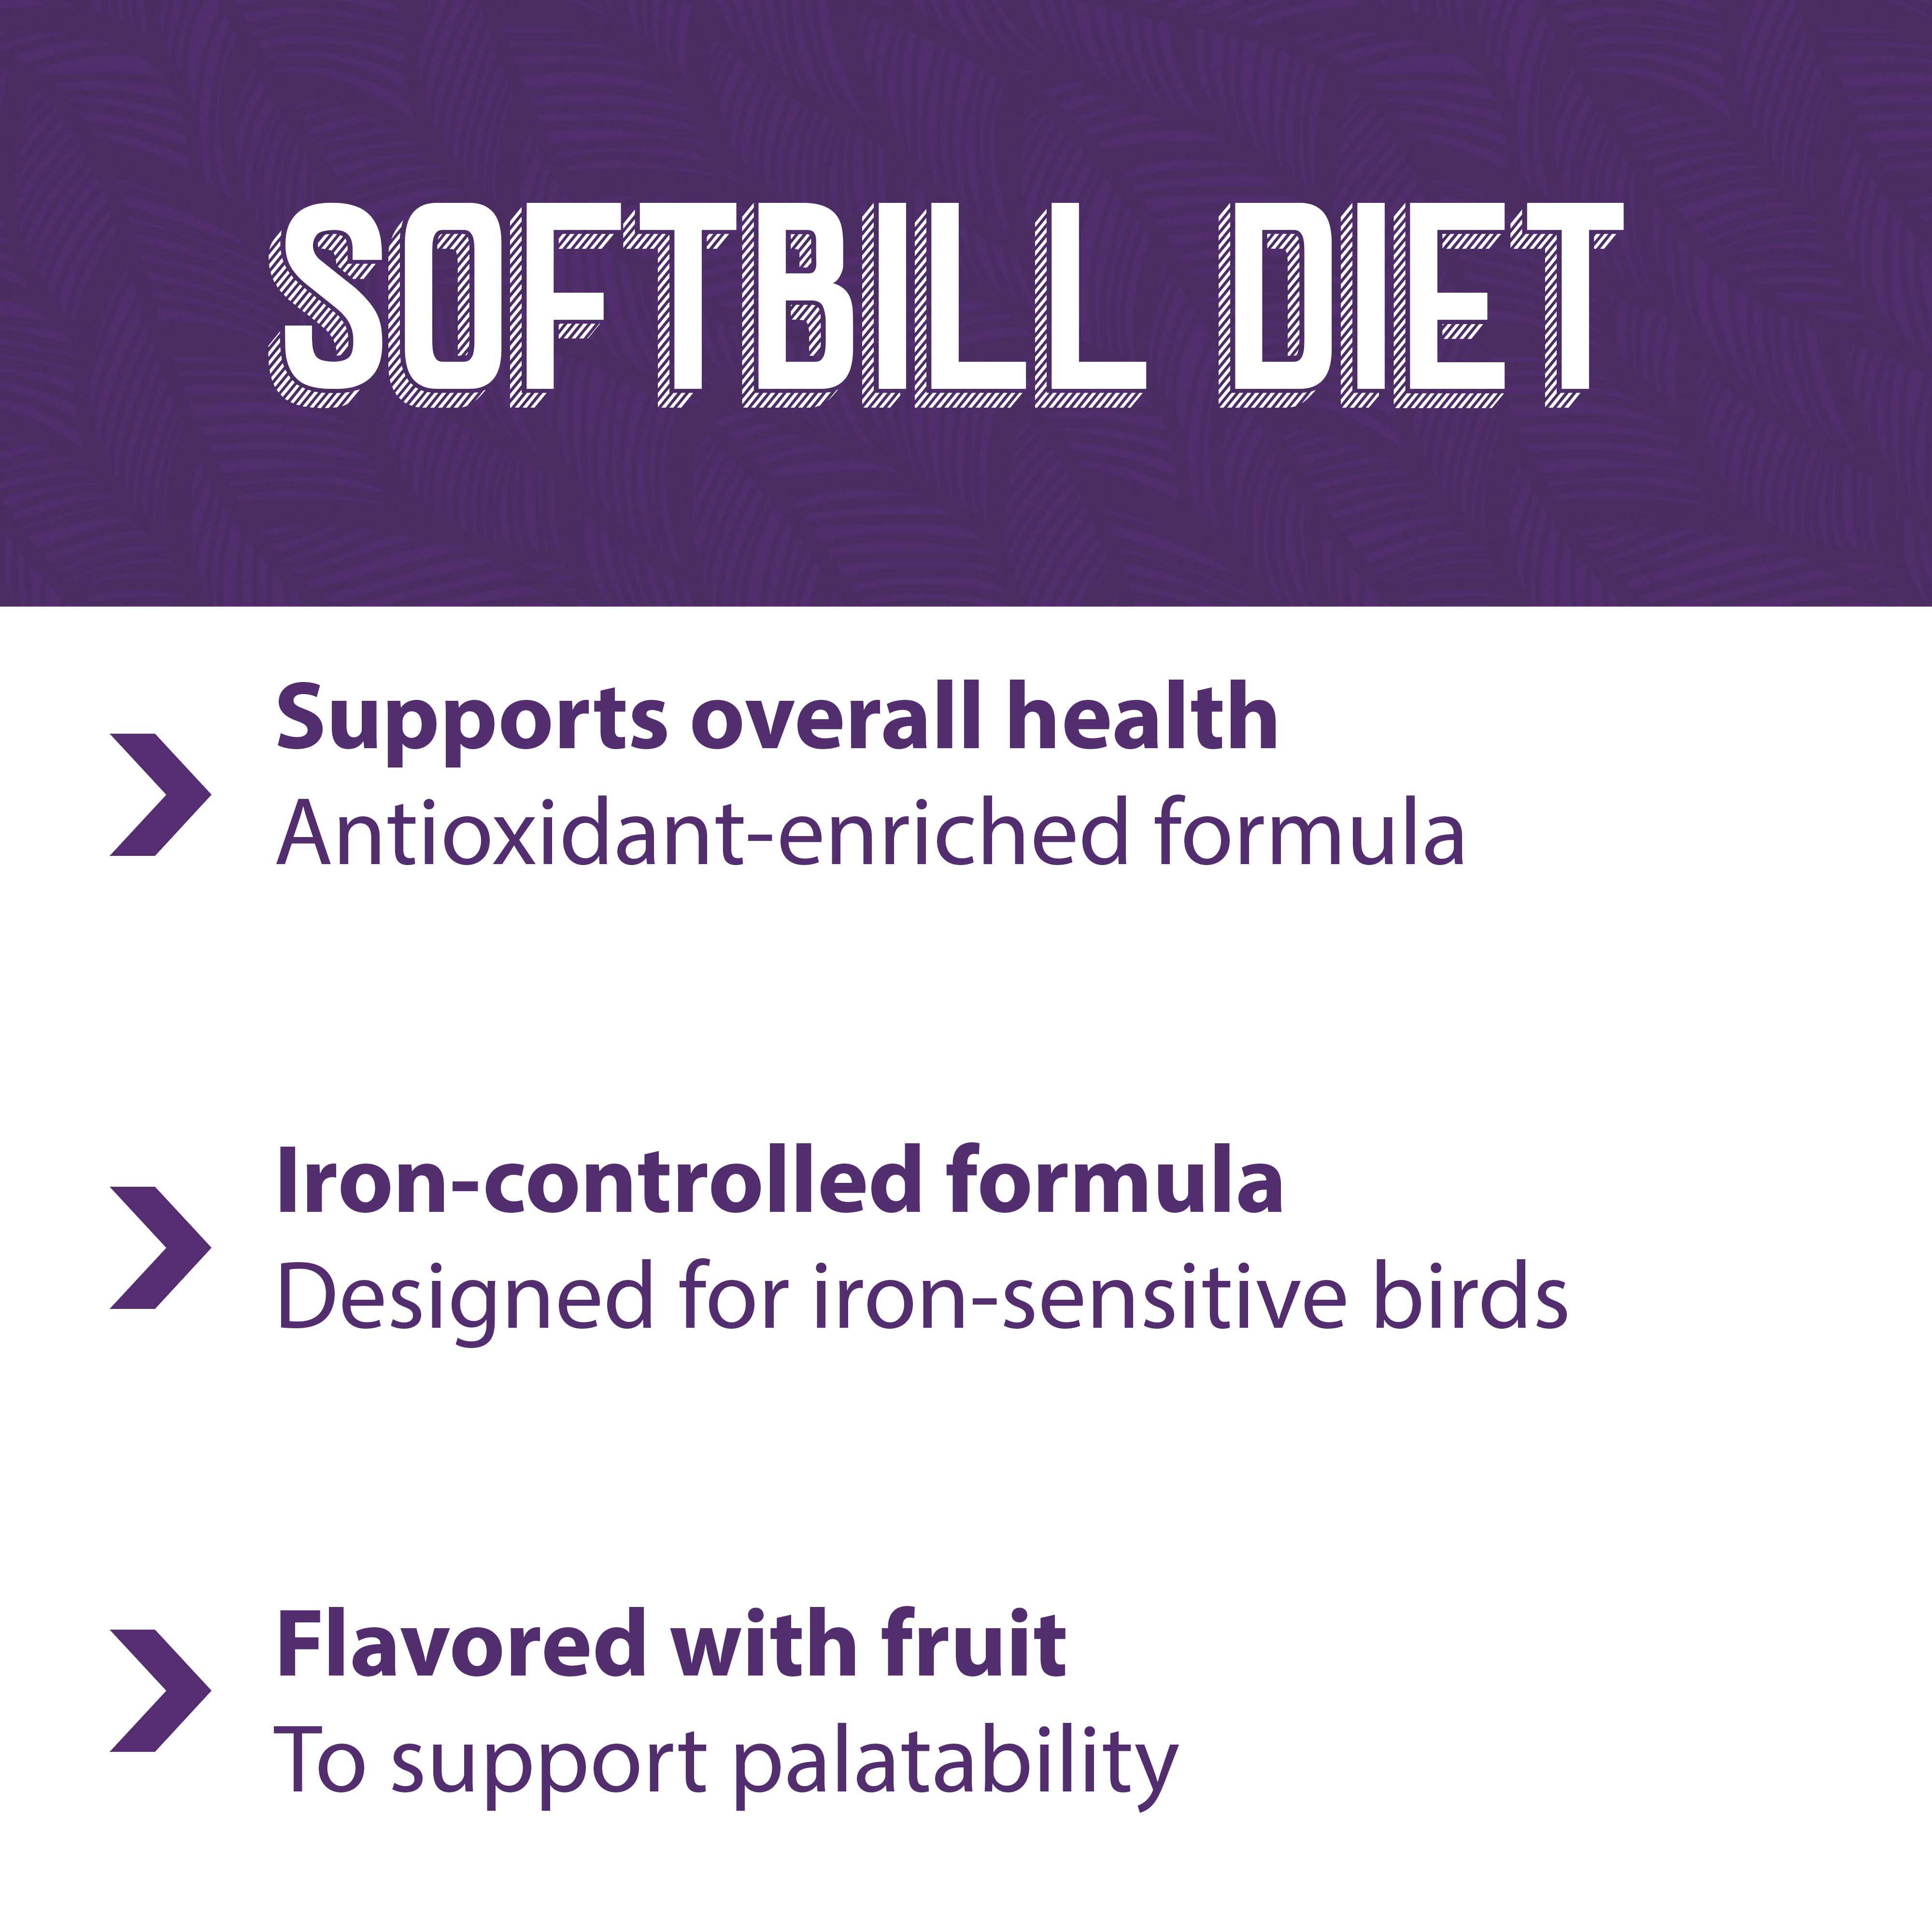 Softbill diet supports overall health